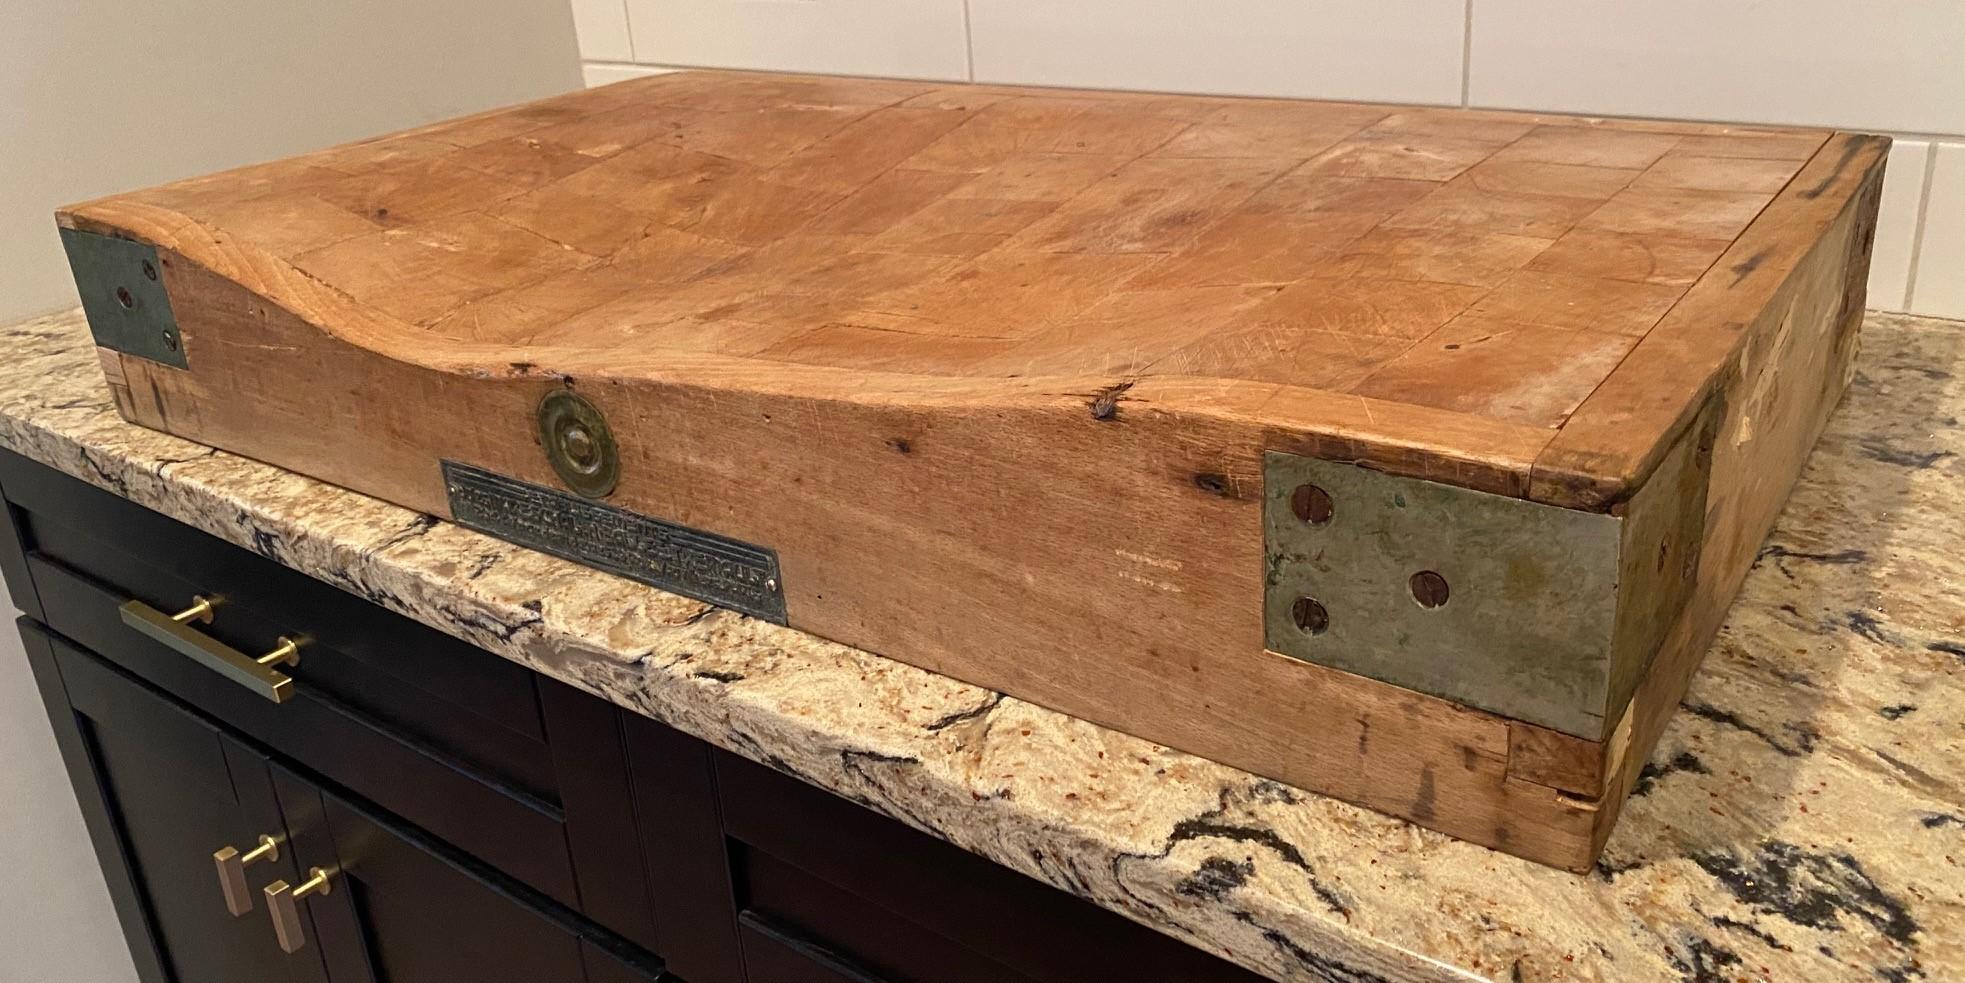 Late 19th c. unrestored French butcher block with original brass brackets and brass plaque showing makers names and Parisian addresses. The original 8.5